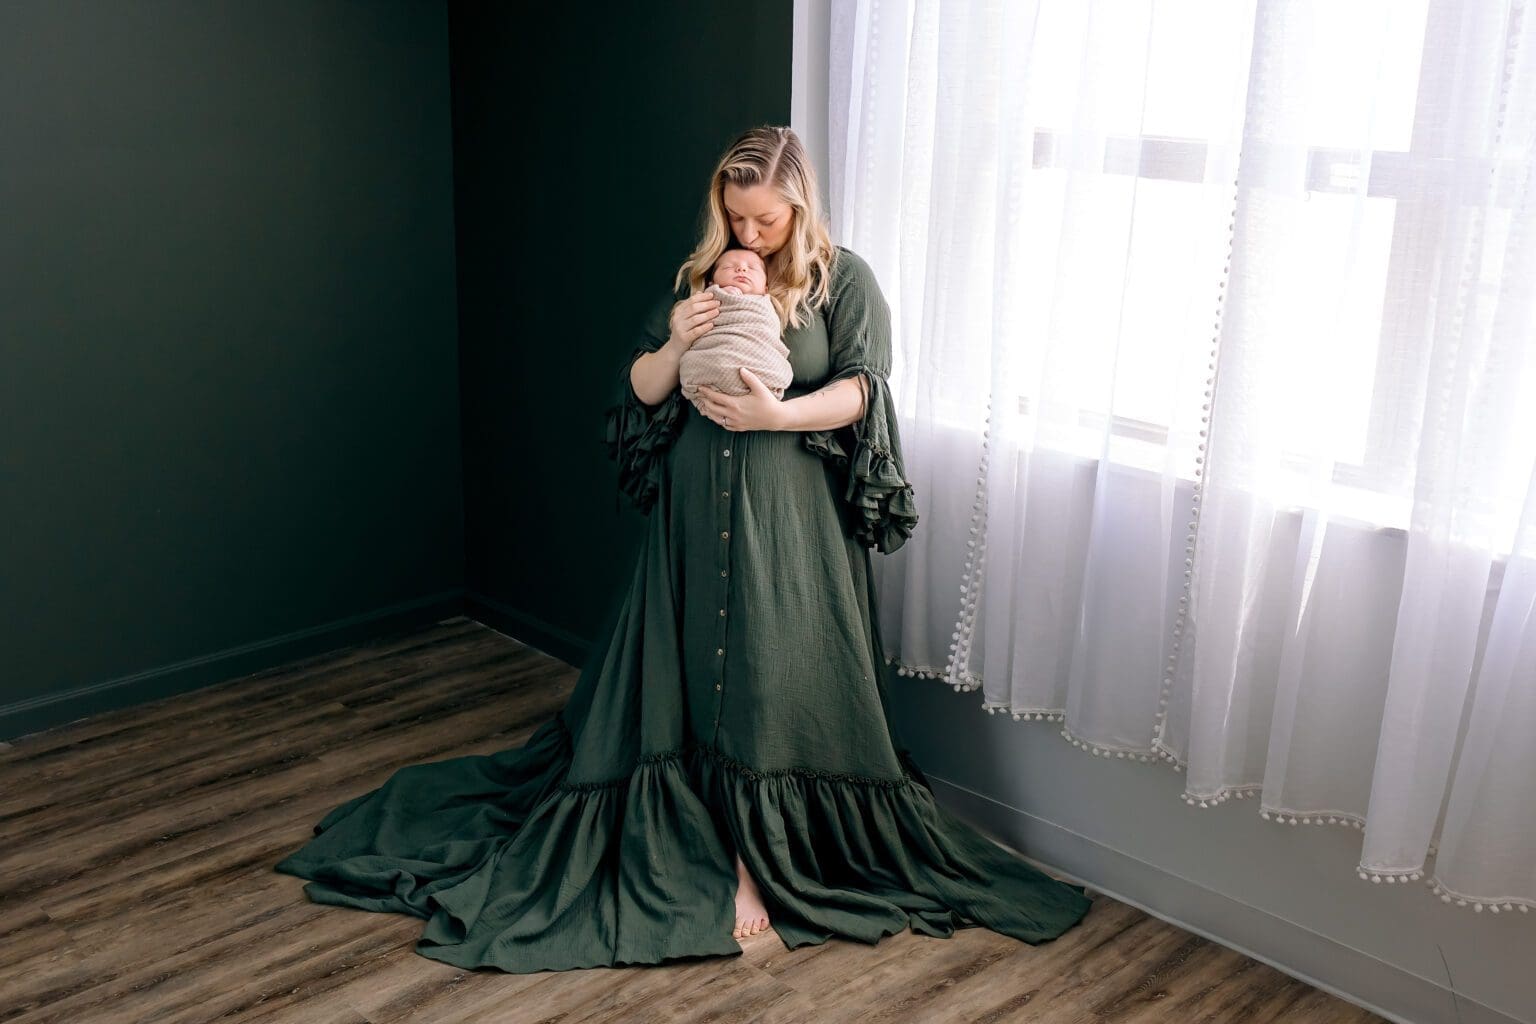 In a serene moment captured by the window's gentle light, a mother strikes a pose while holding her newborn wrapped in a soft tan wrap. With profound tenderness, she places a gentle kiss on the baby's head, expressing a deep affection and maternal adoration.